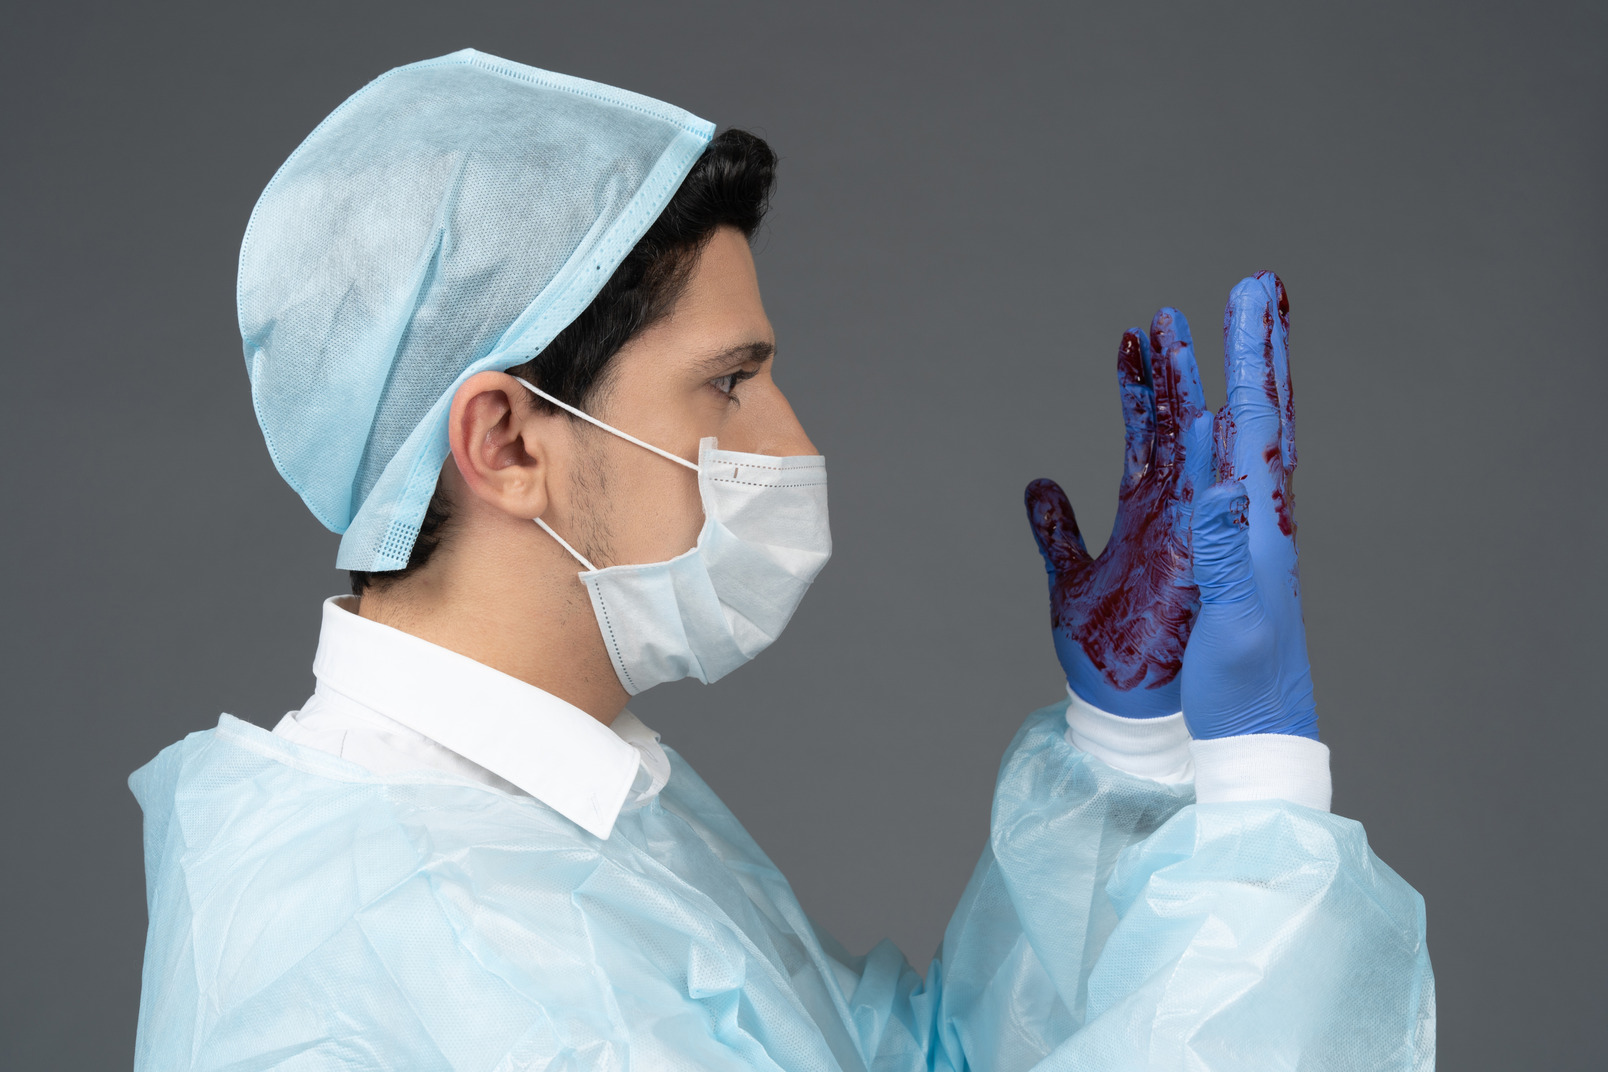 Doctor looking at his hands covered in blood in profile